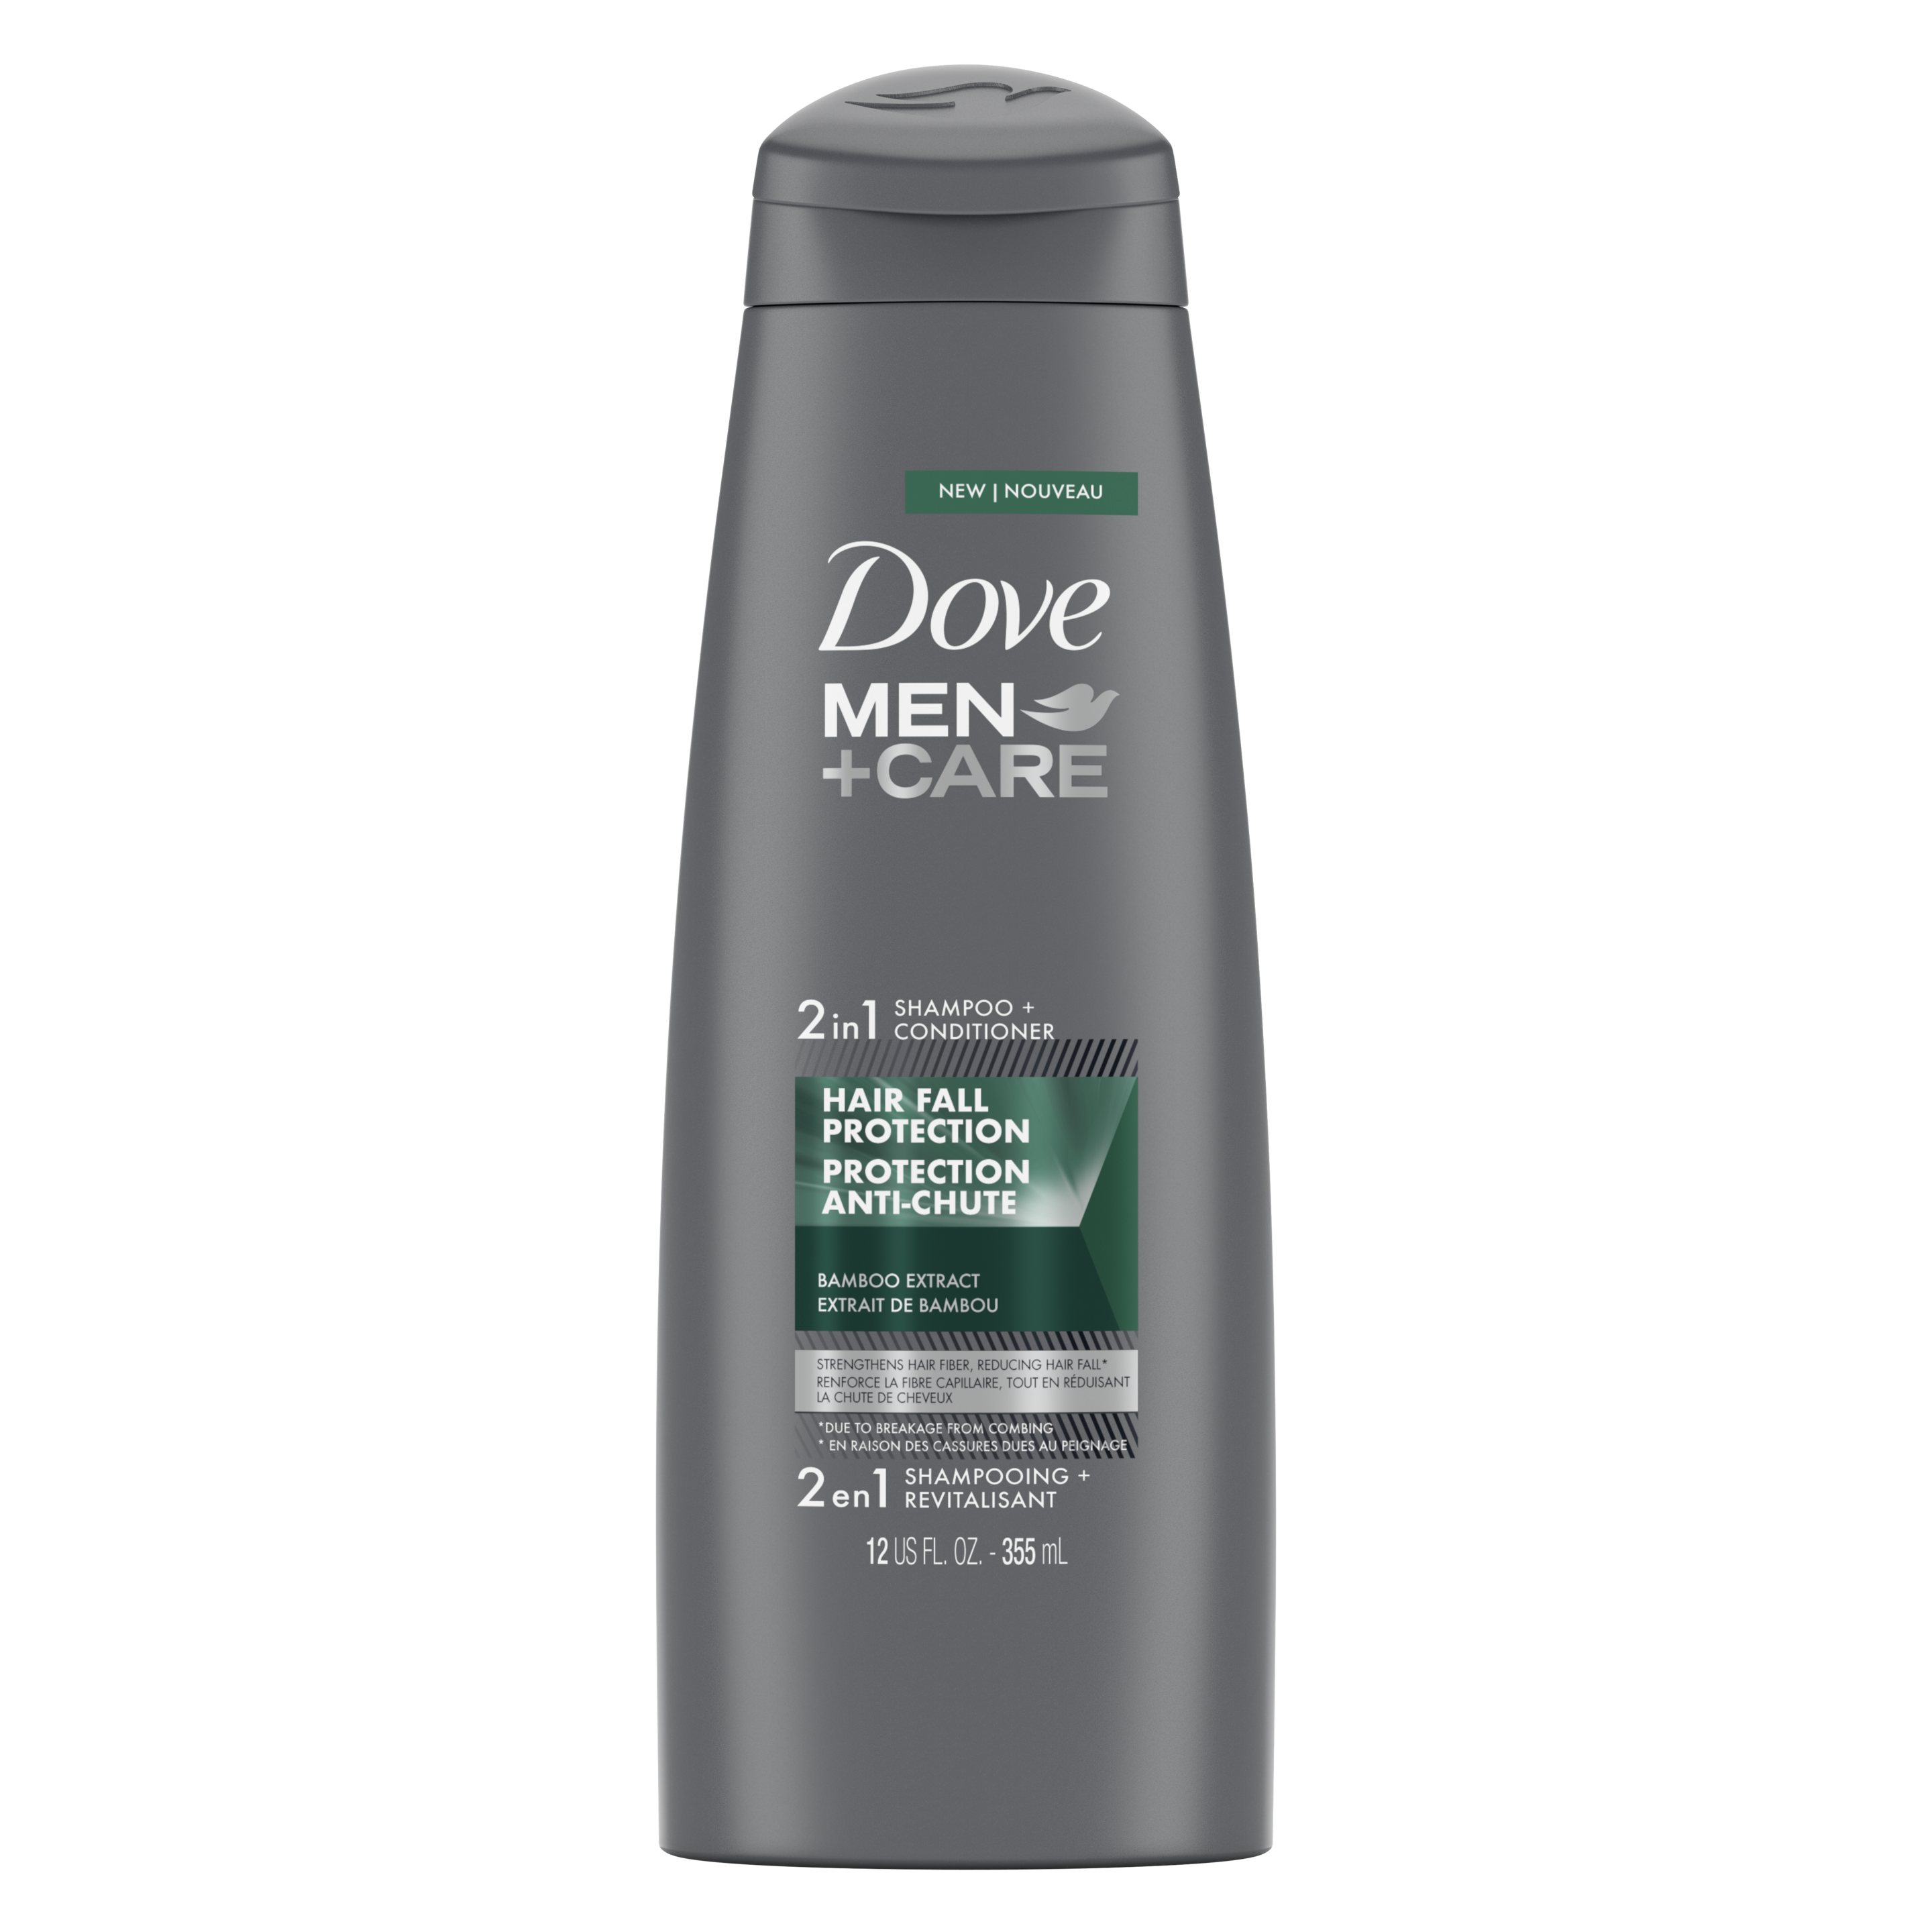 Dove Men+Care Hair Fall Protection 2in1 Shampoo and Conditioner